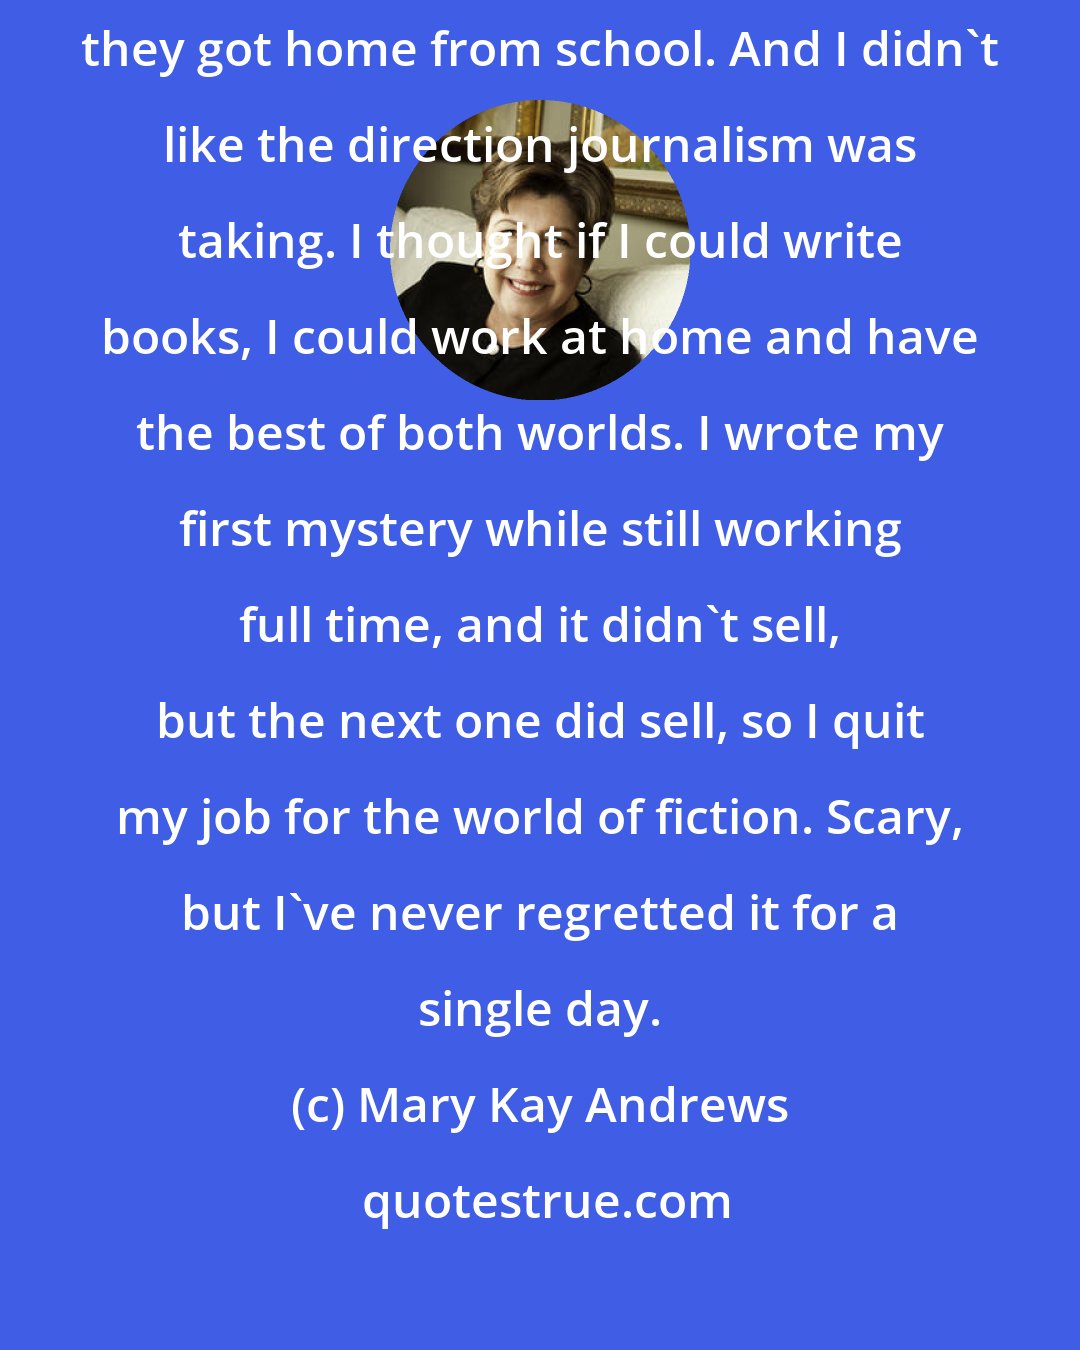 Mary Kay Andrews: Many years ago I had two small children, and I wanted to be able to be home when they got home from school. And I didn't like the direction journalism was taking. I thought if I could write books, I could work at home and have the best of both worlds. I wrote my first mystery while still working full time, and it didn't sell, but the next one did sell, so I quit my job for the world of fiction. Scary, but I've never regretted it for a single day.